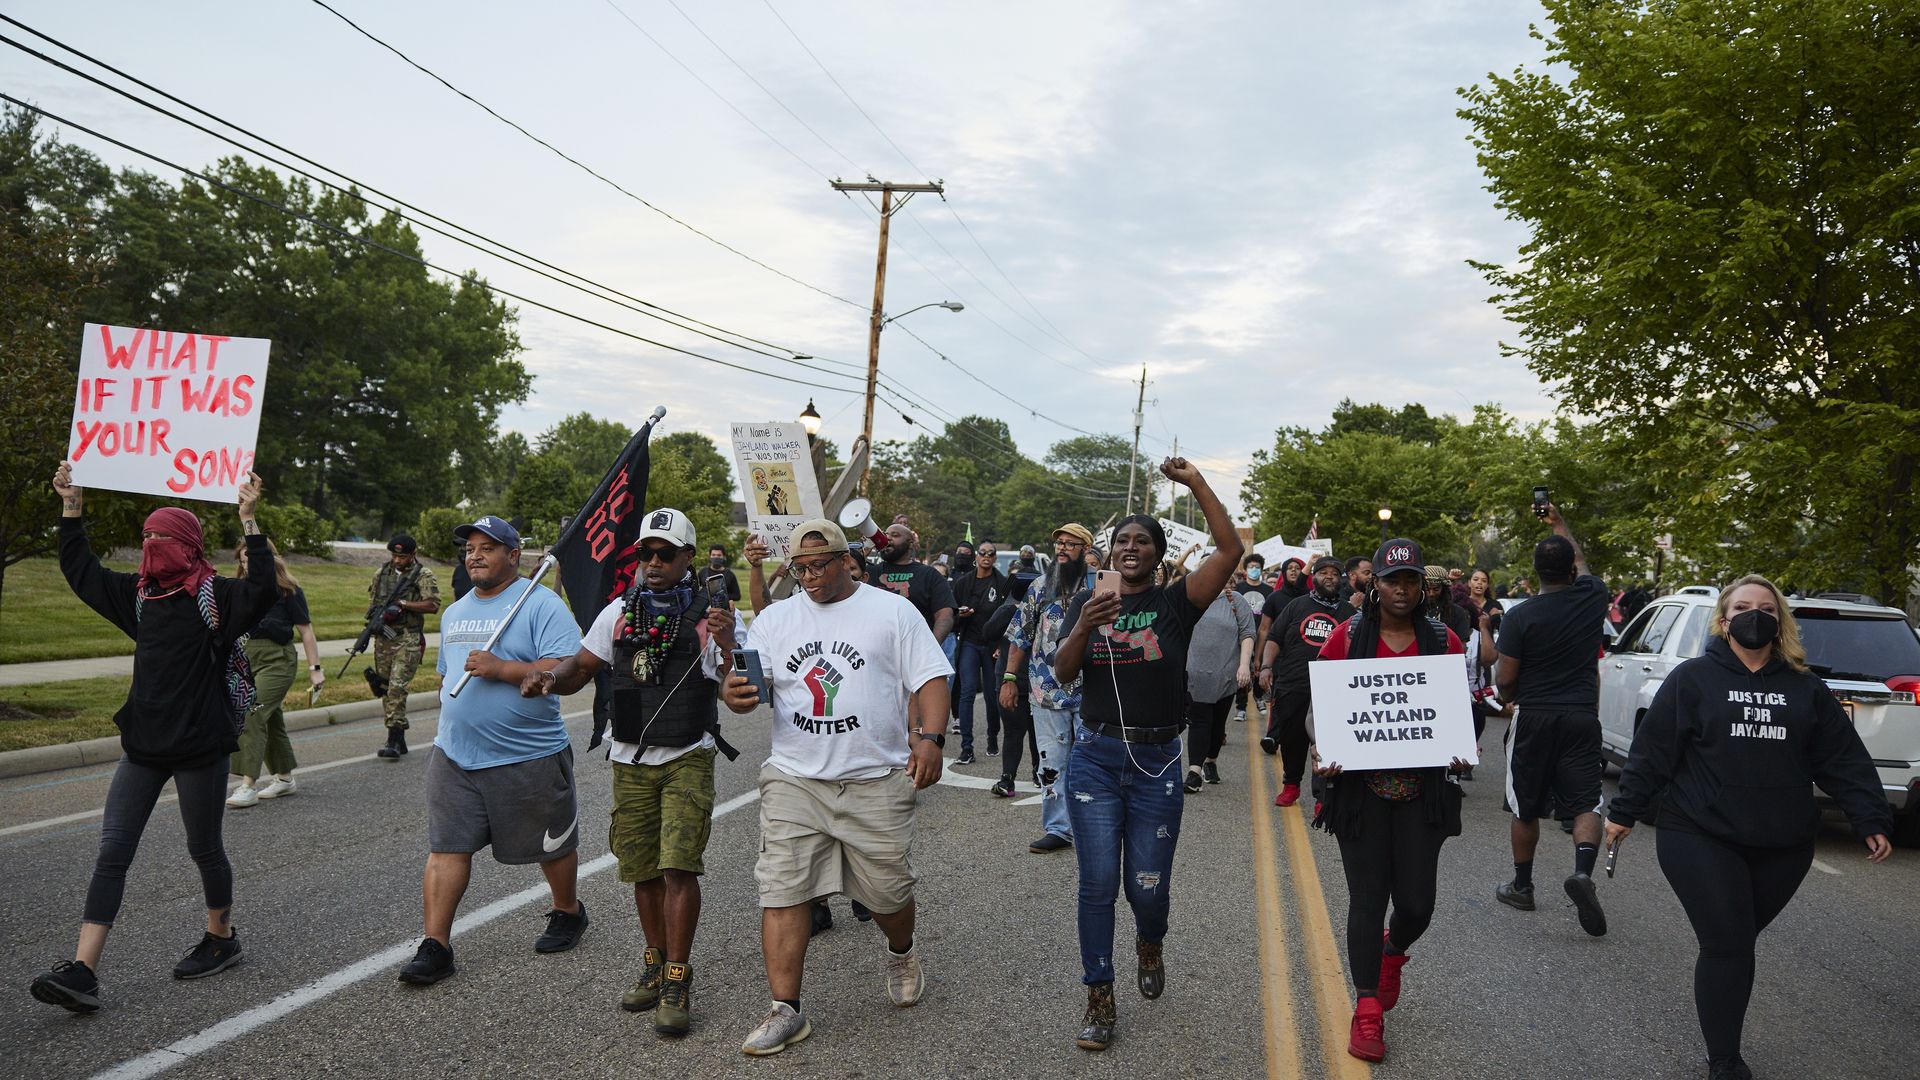 Demonstrators march down E. Wilbeth St. after holding a vigil in honor of Jayland Walker on July 8, 2022 in Akron, Ohio.